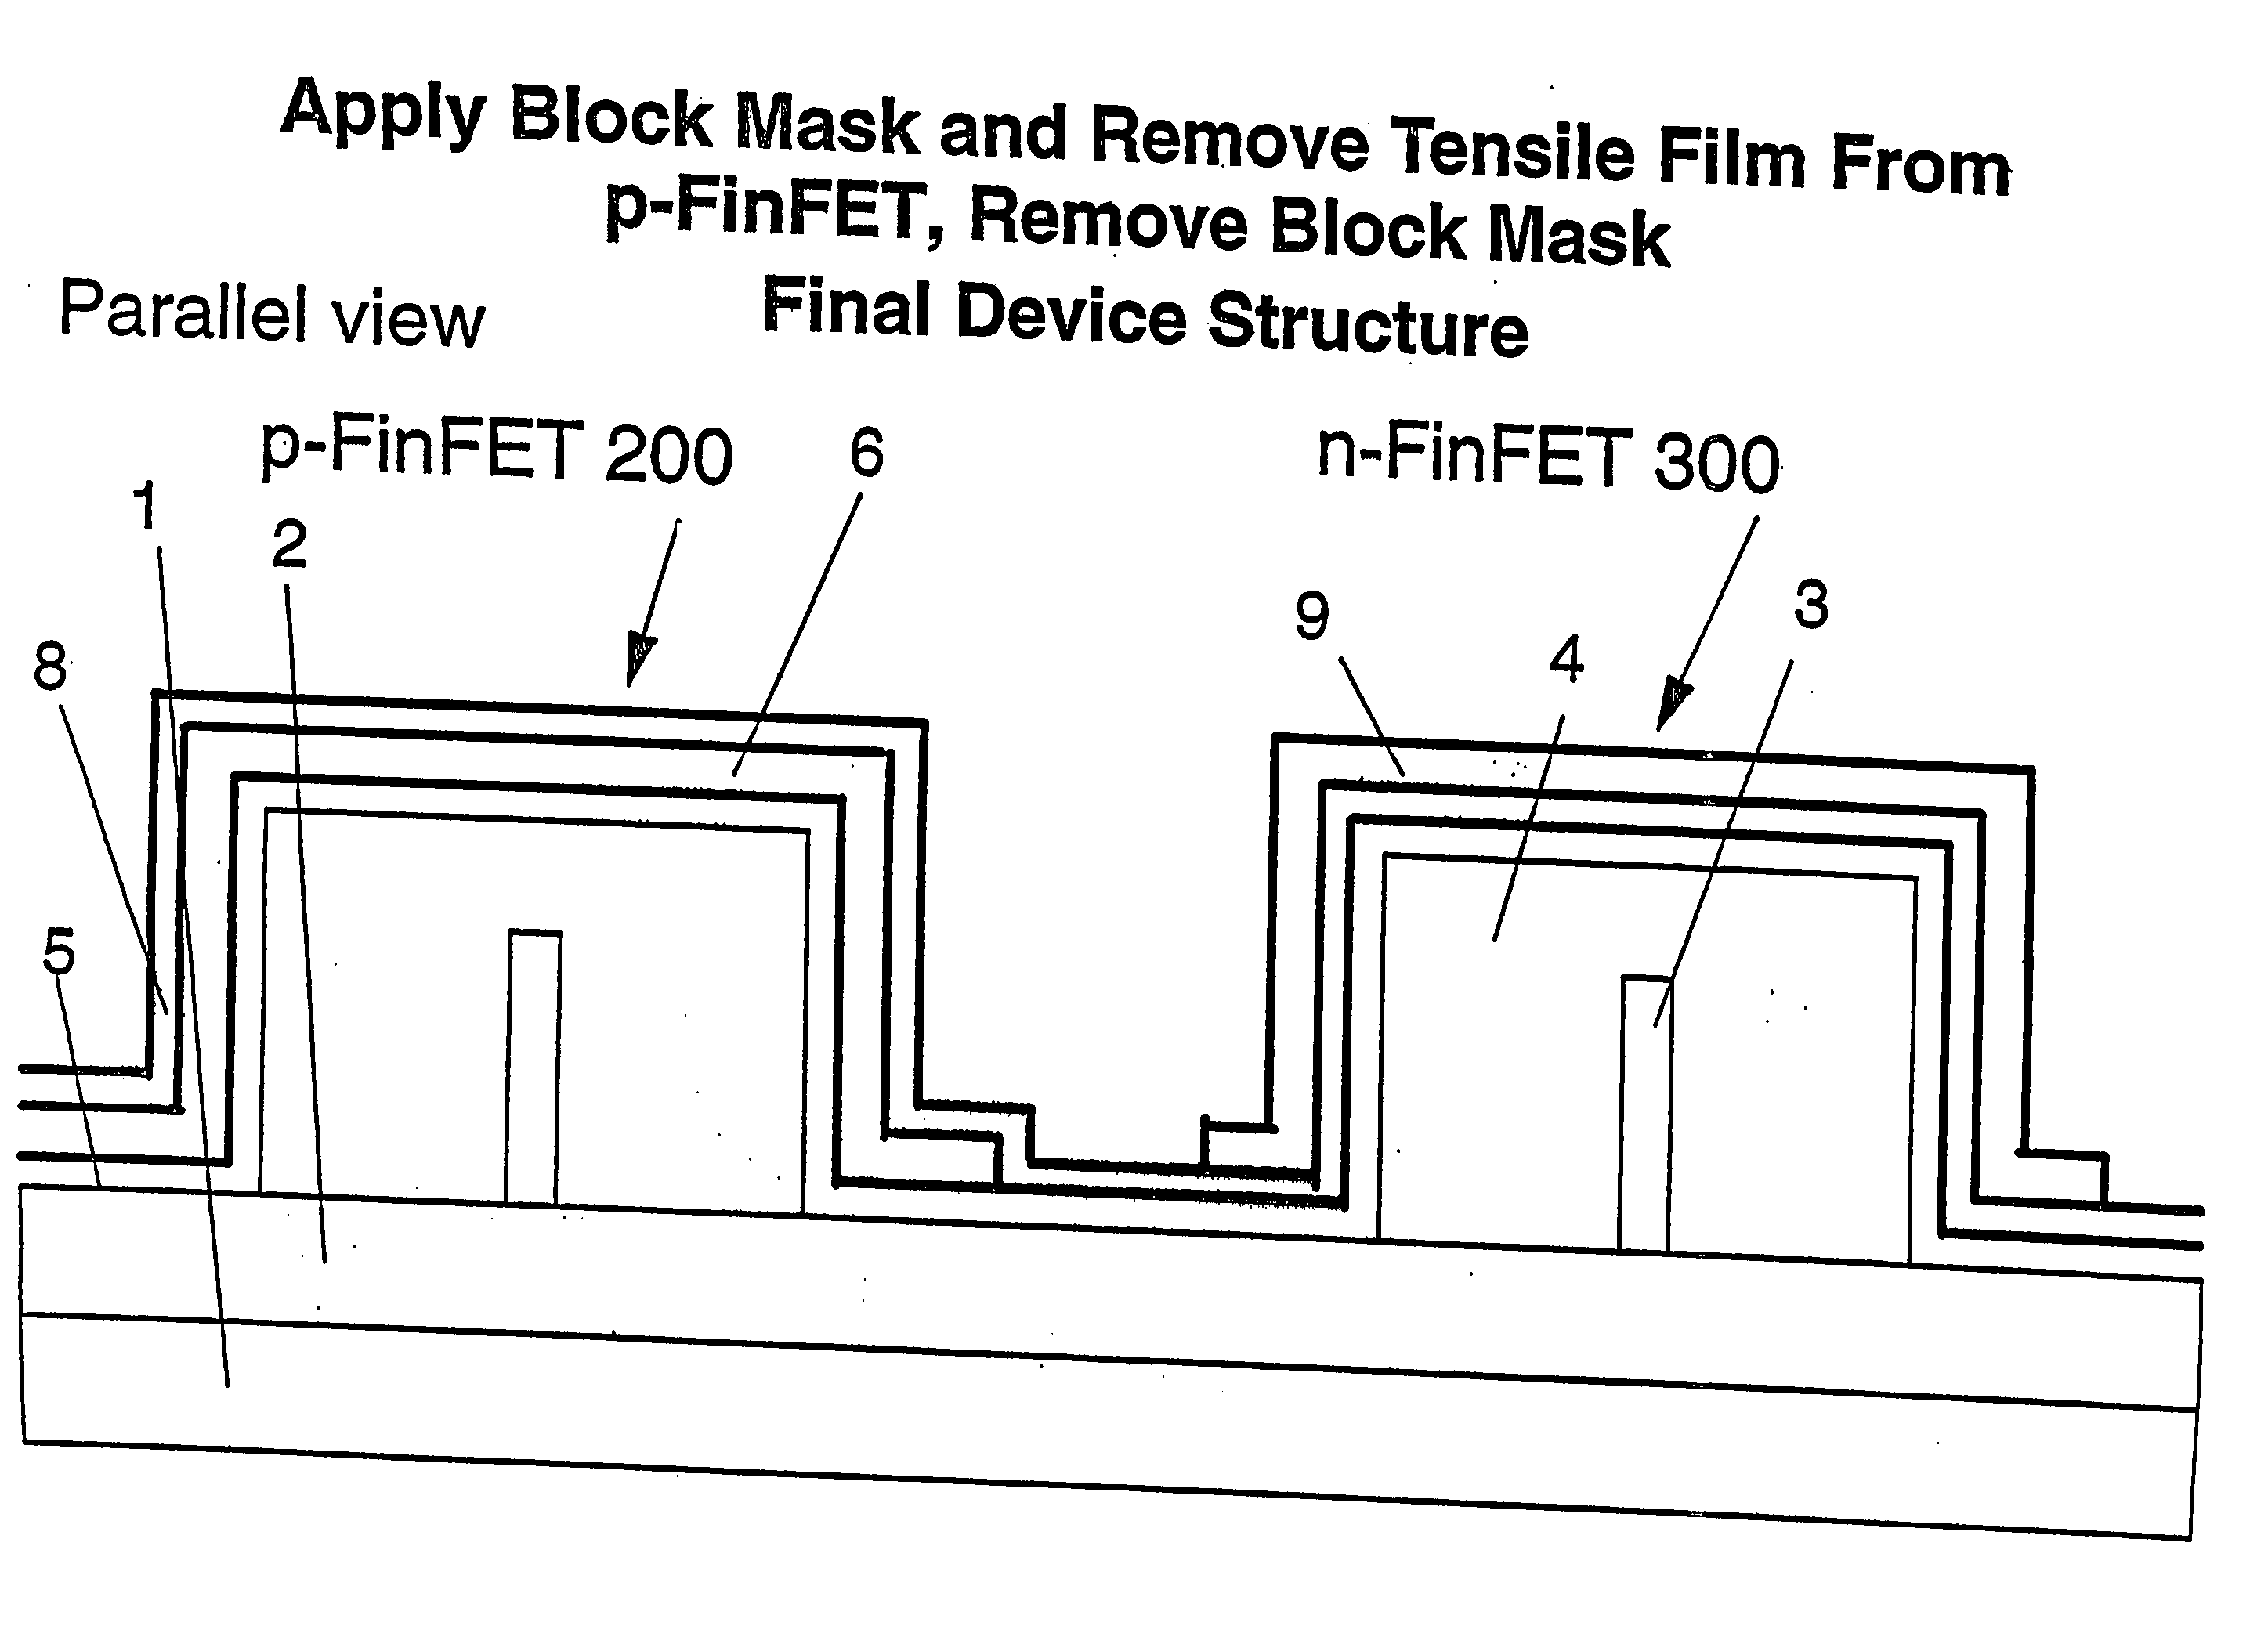 Strained finfet cmos device structures